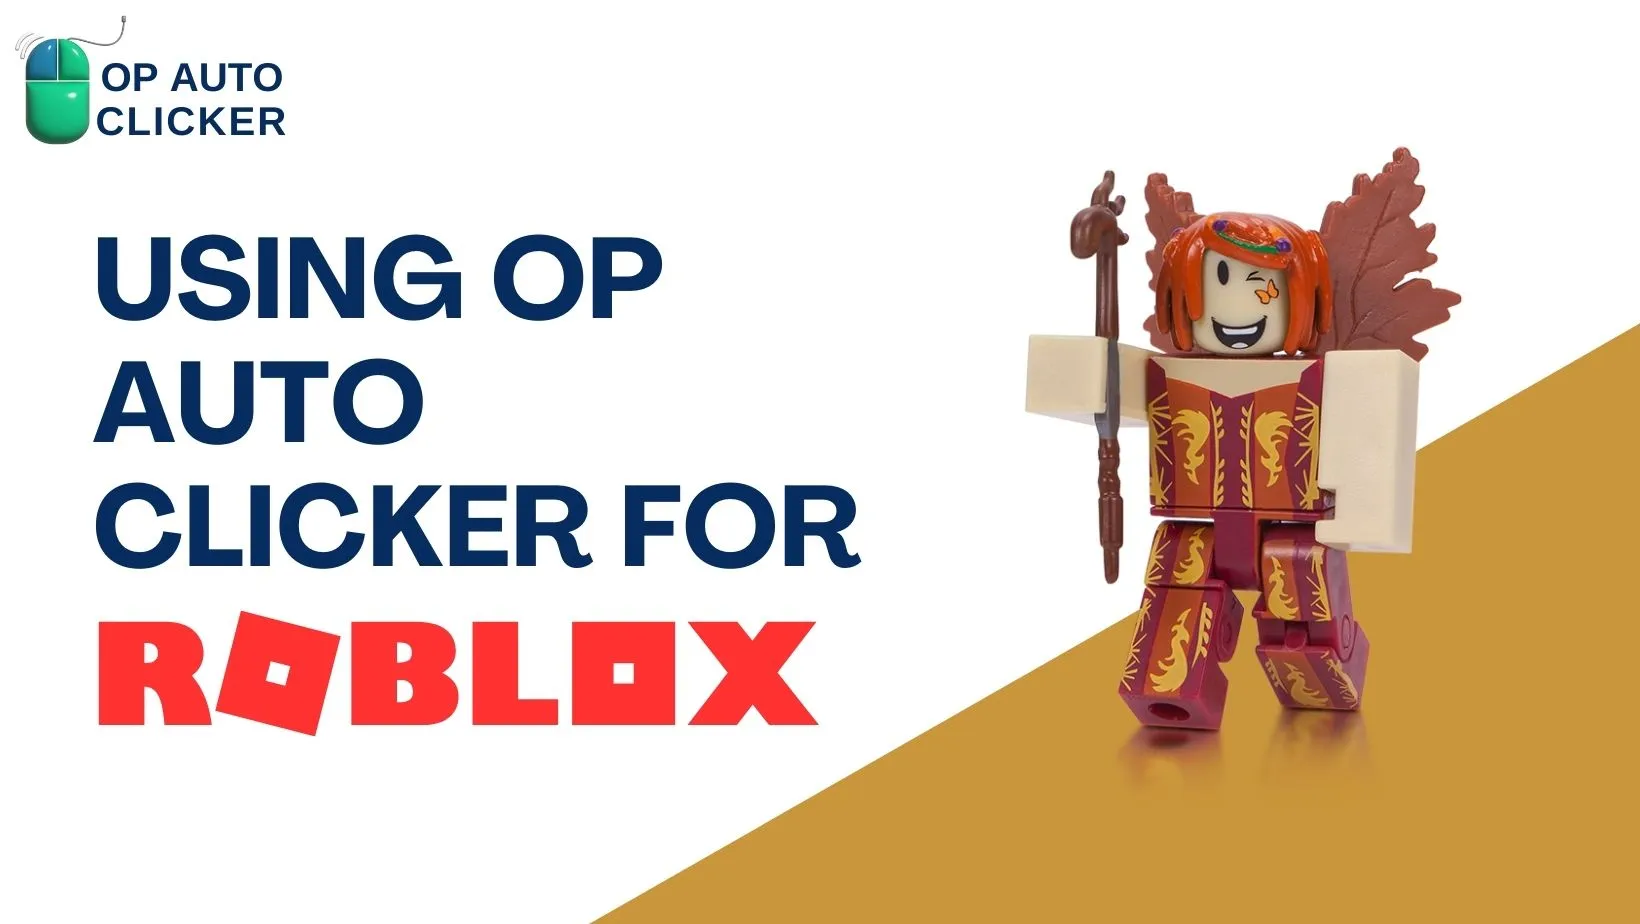 Using OP Auto Clicker for Roblox